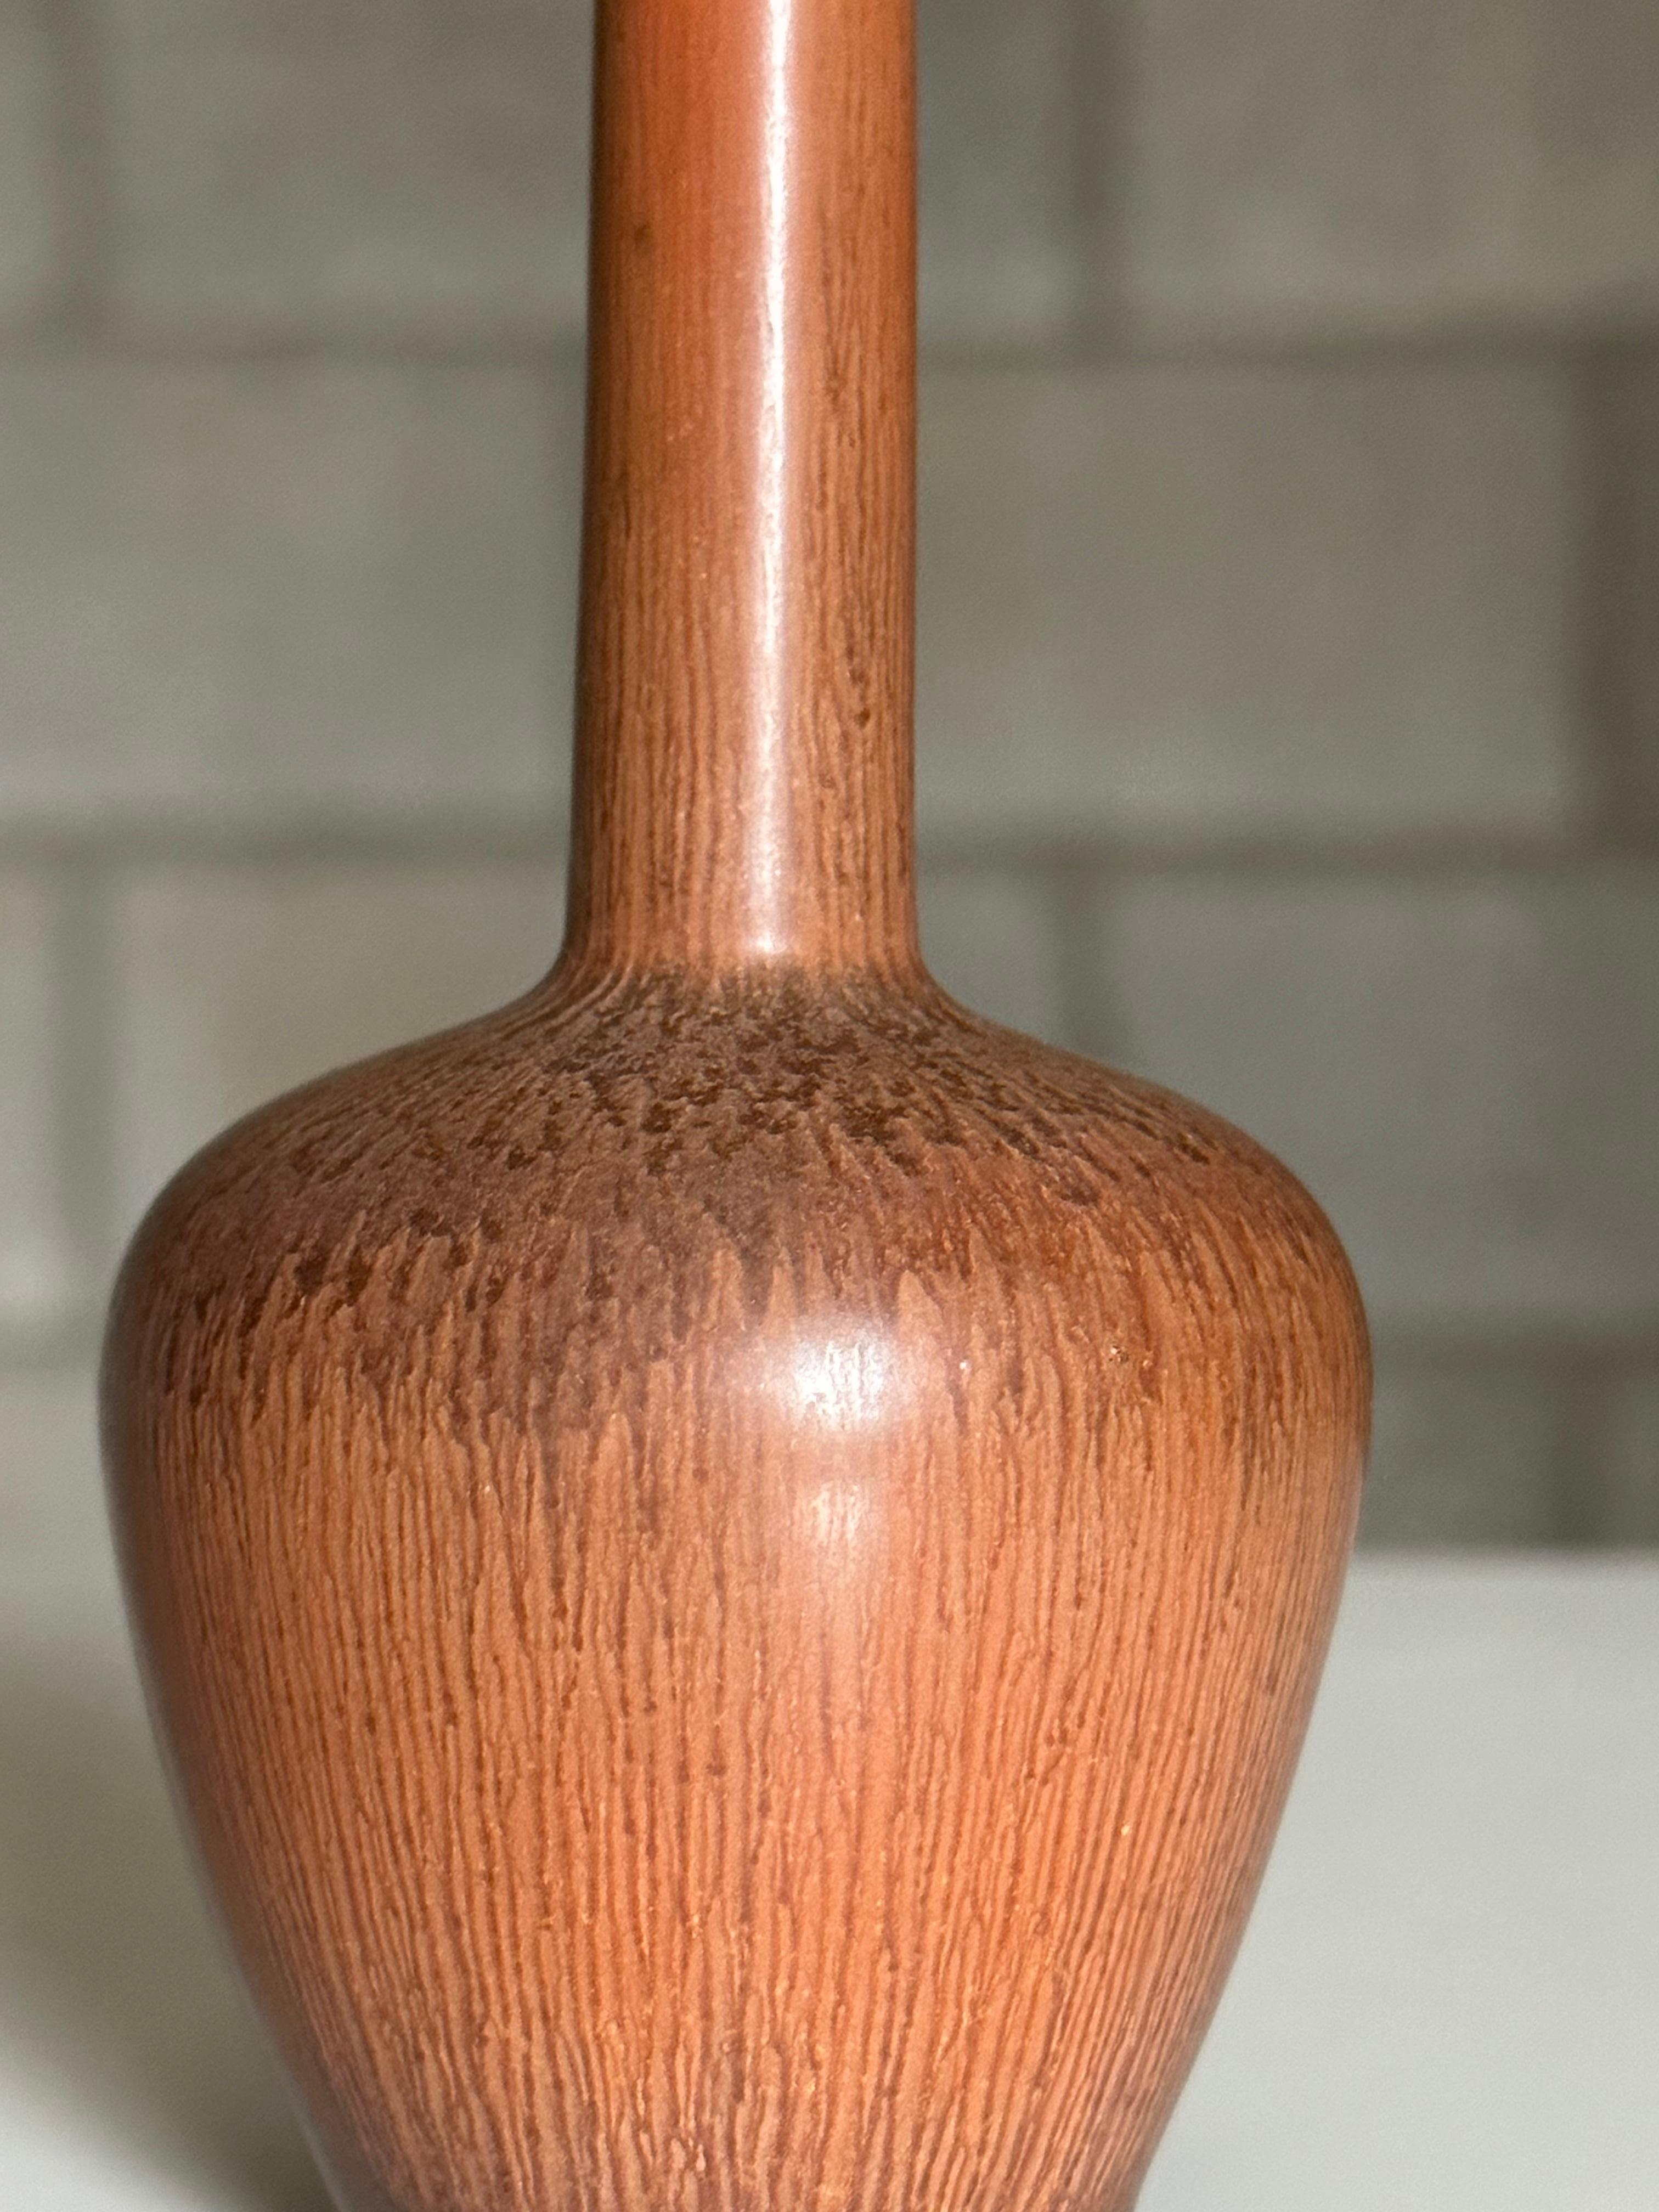 A wonderful small vase designed by Carl-Harry Stålhane for Rörstrand. Features a bulbous body and a longer thin neck. Stunning terra cotta color to complete the vase.